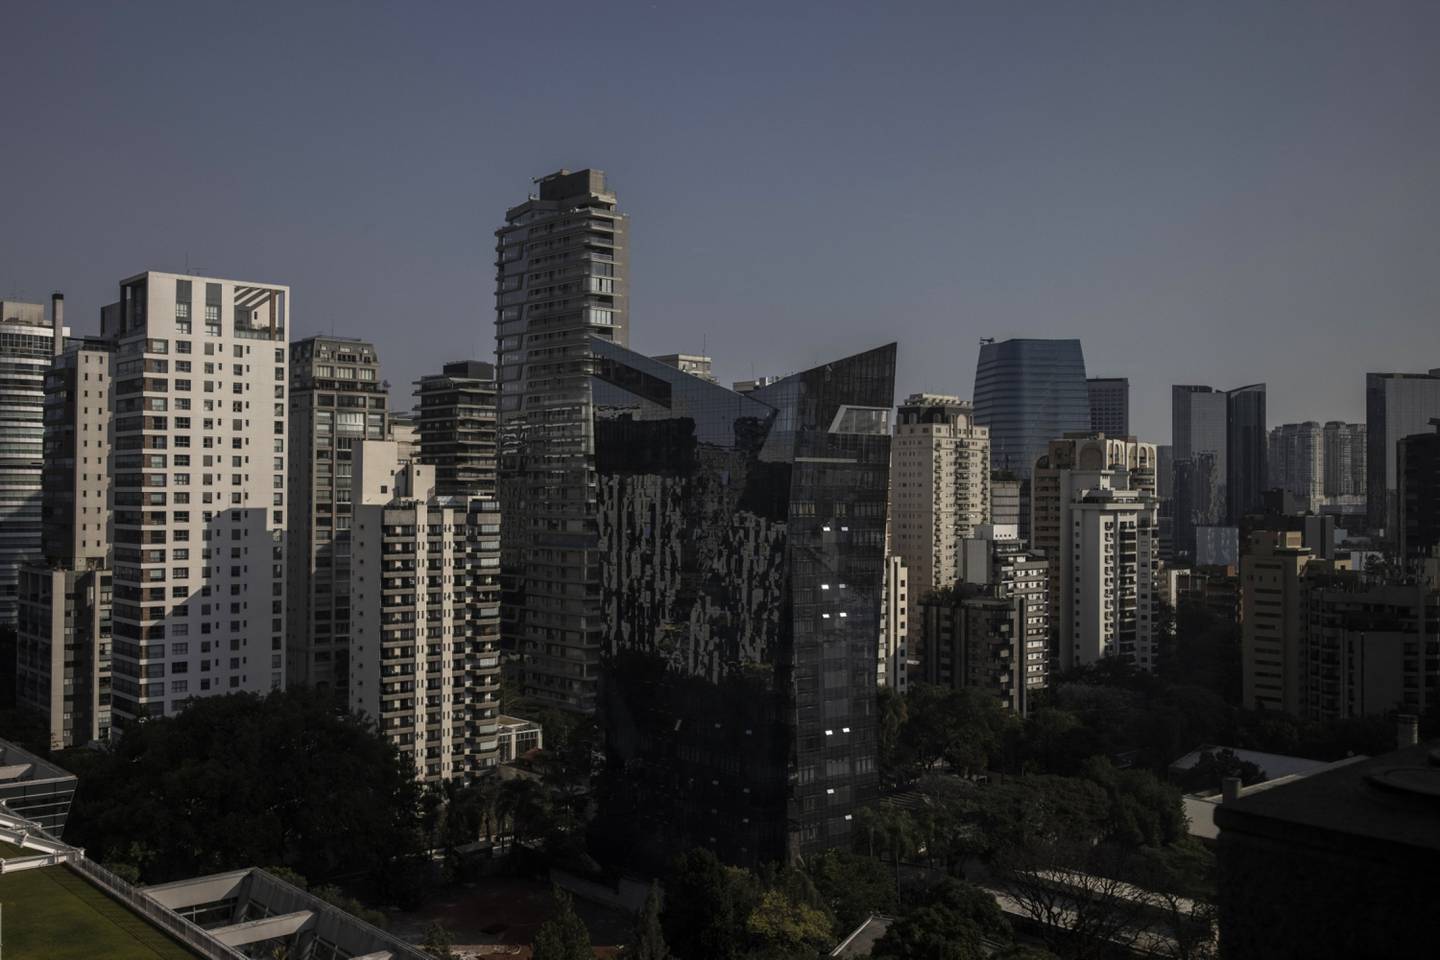 The economy remains one of the top concerns for Brazilians as they head to the polls on Oct. 2.